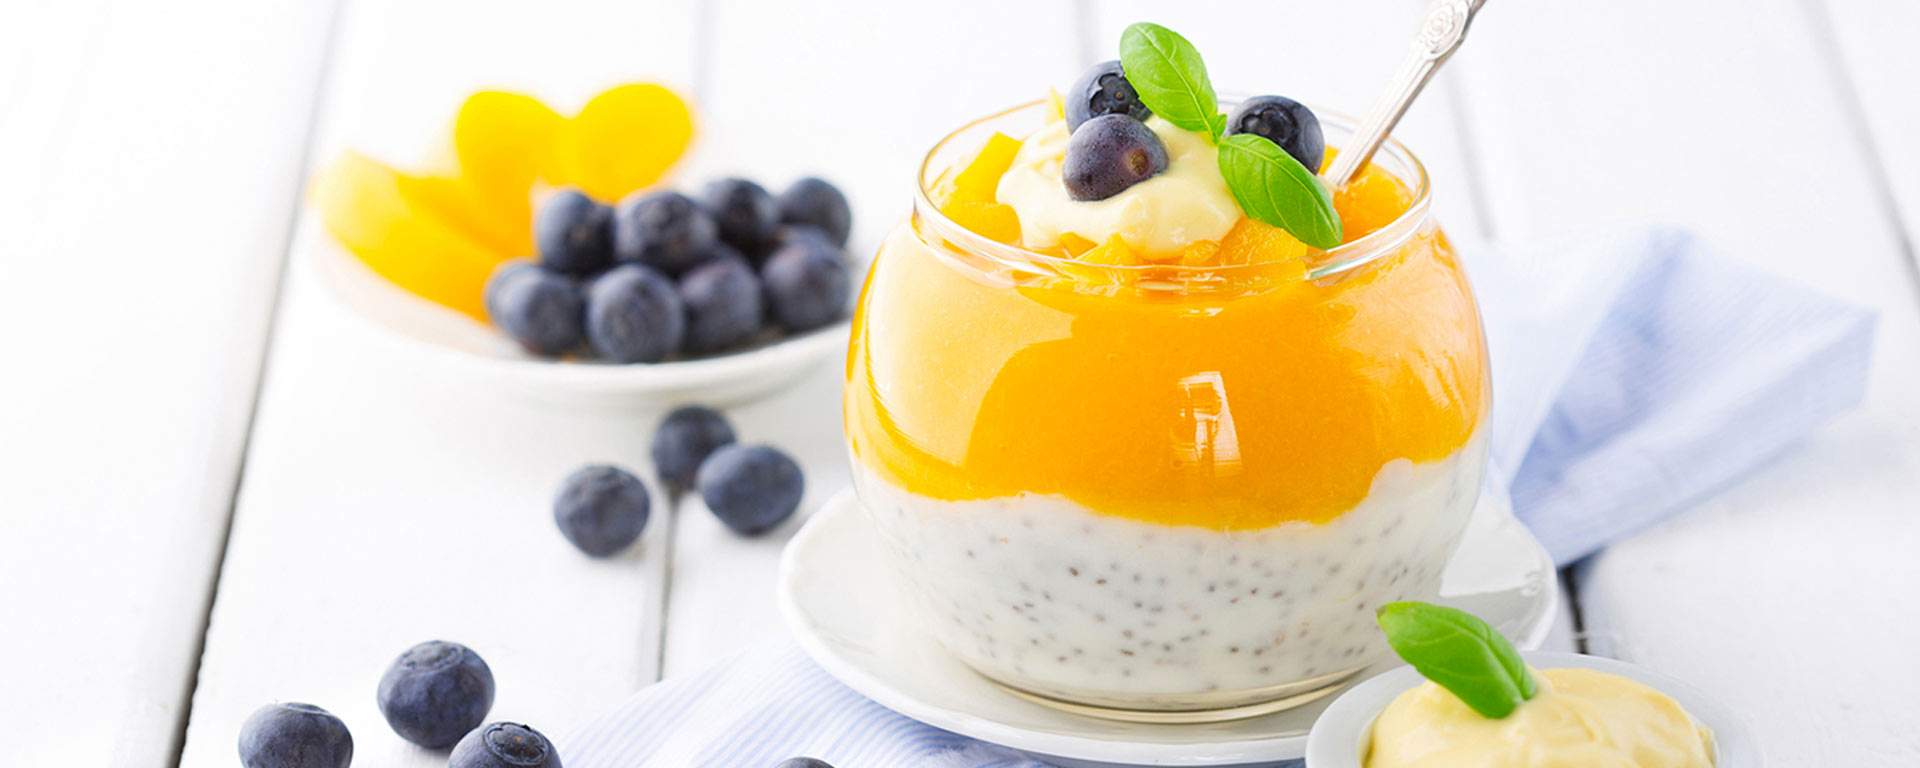 Photo for - Smooth Blueberry Ginger Peach Parfait